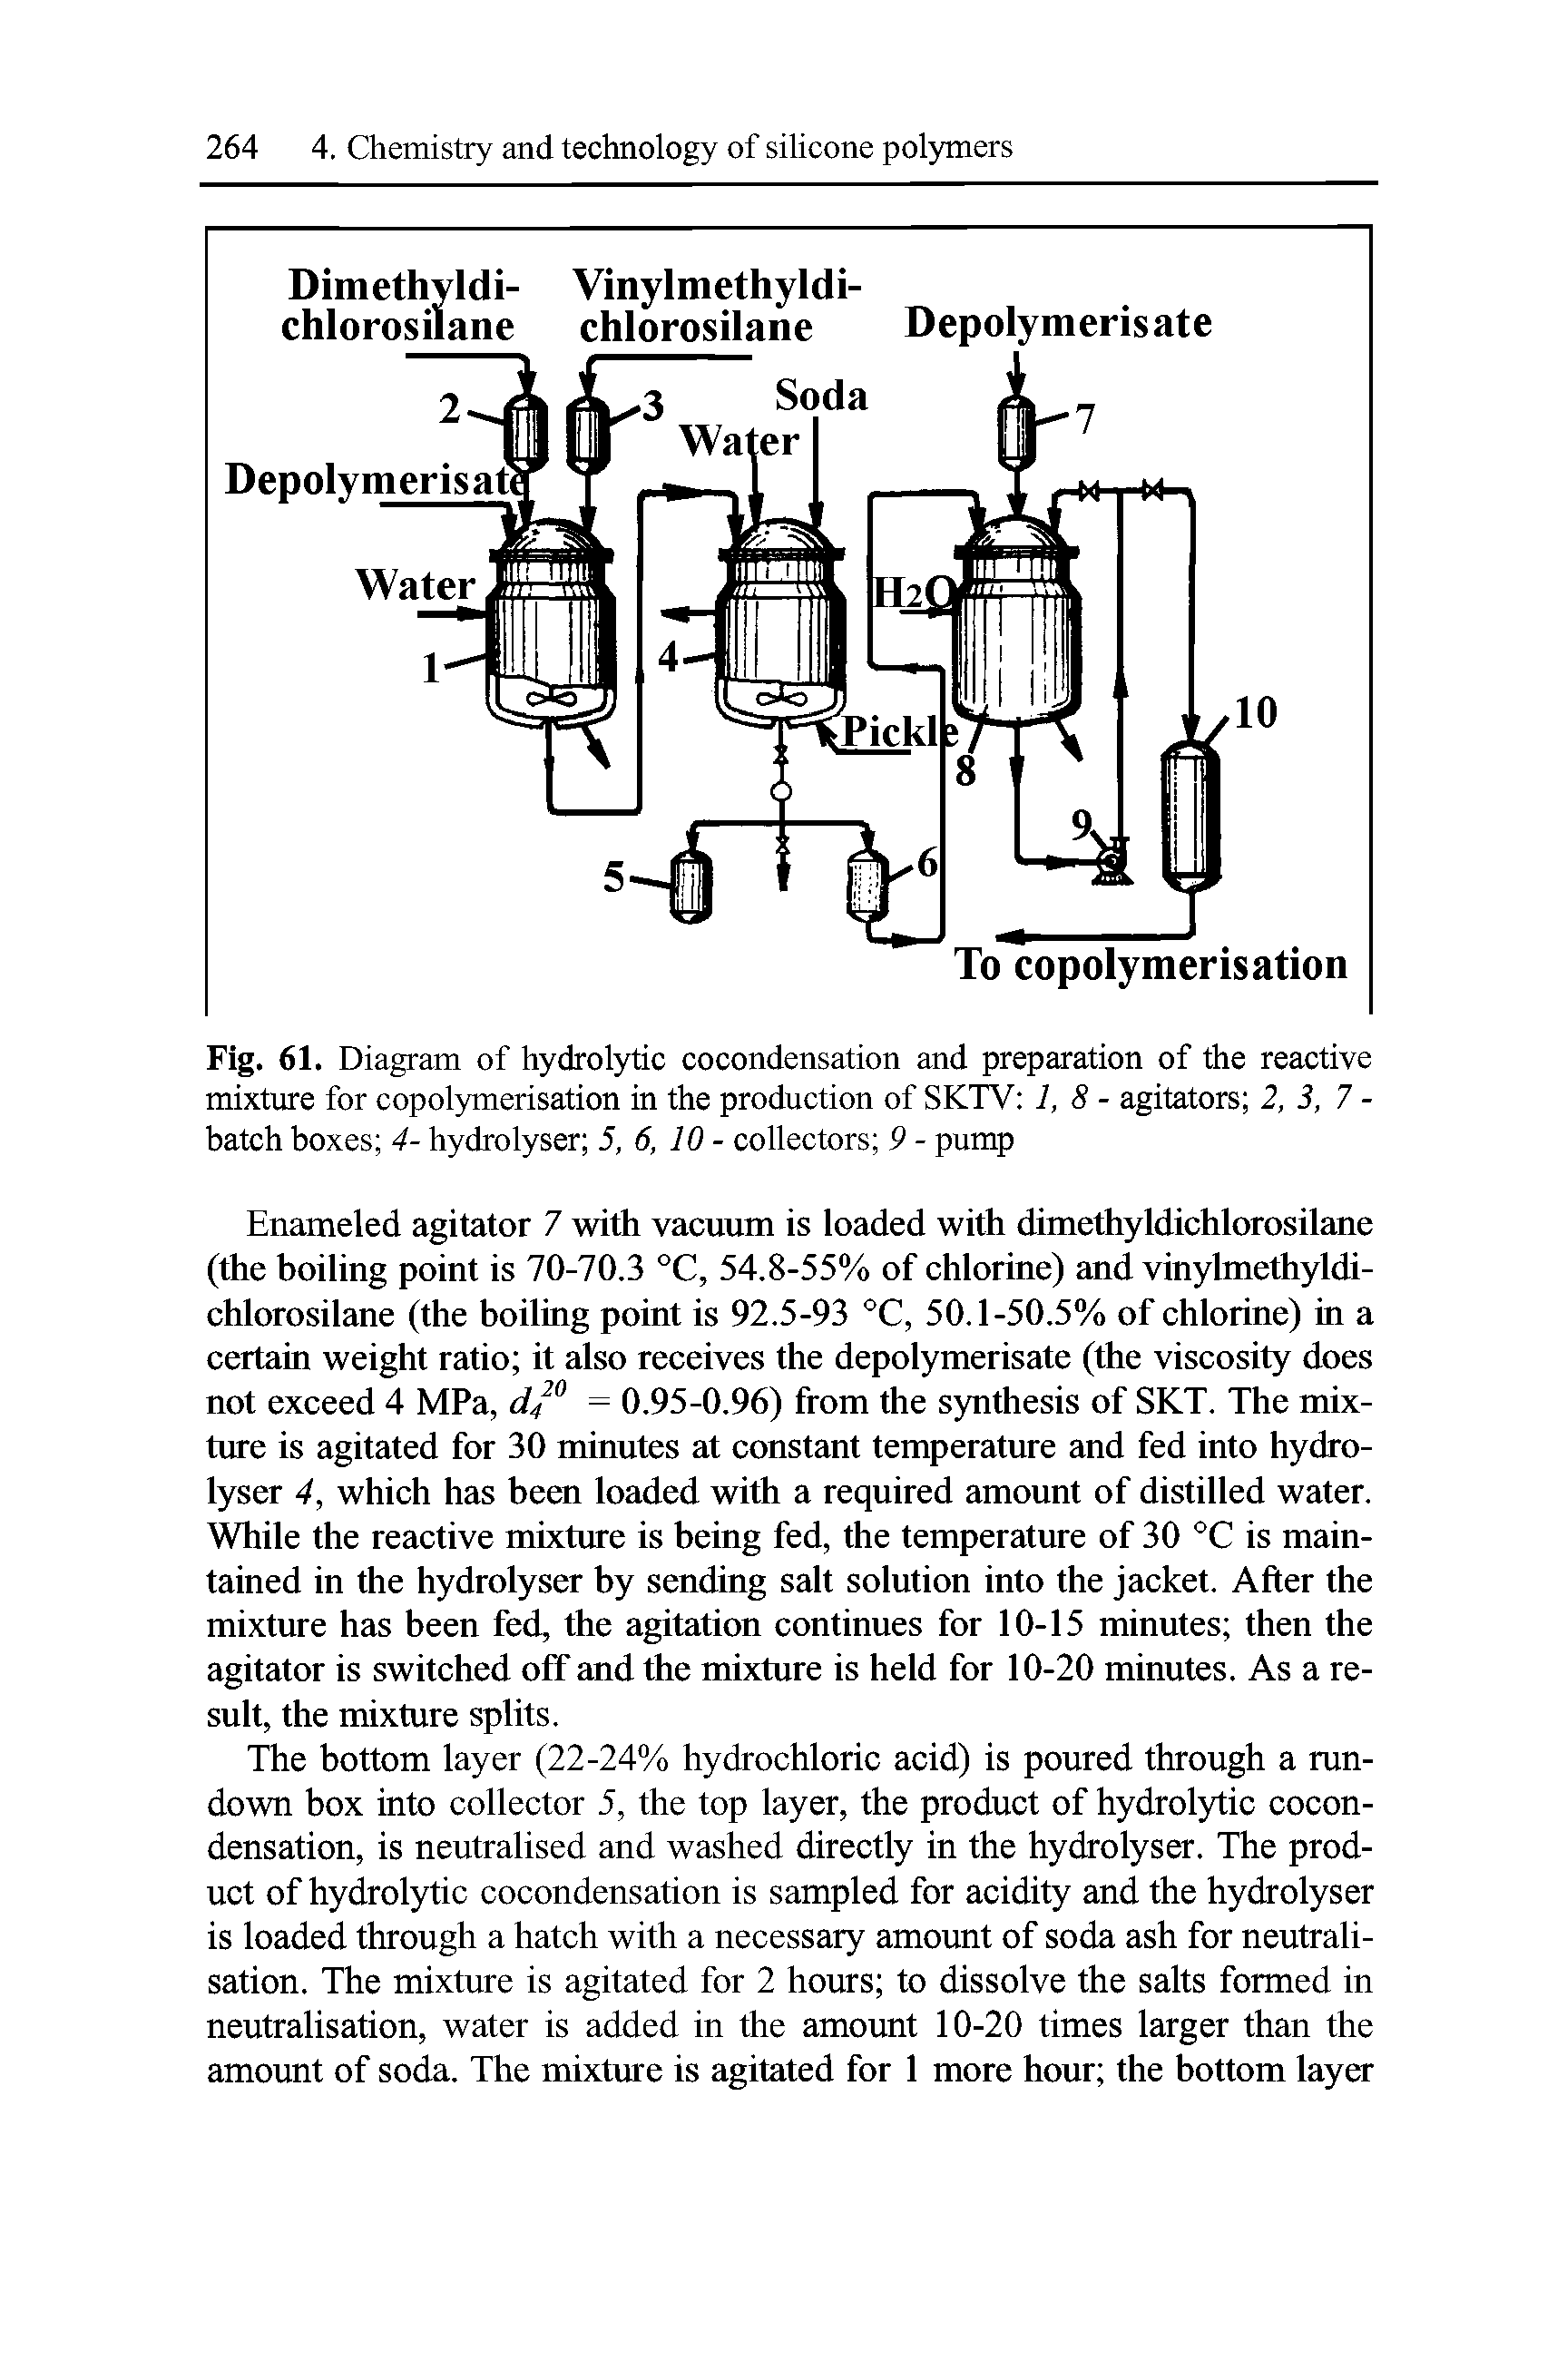 Fig. 61. Diagram of hydrolytic cocondensation and preparation of the reactive mixture for copolymerisation in the production of SKTV 1,8- agitators 2, 3, 7 -batch boxes 4- hydrolyser 5, 6, 10 - collectors 9 - pump...